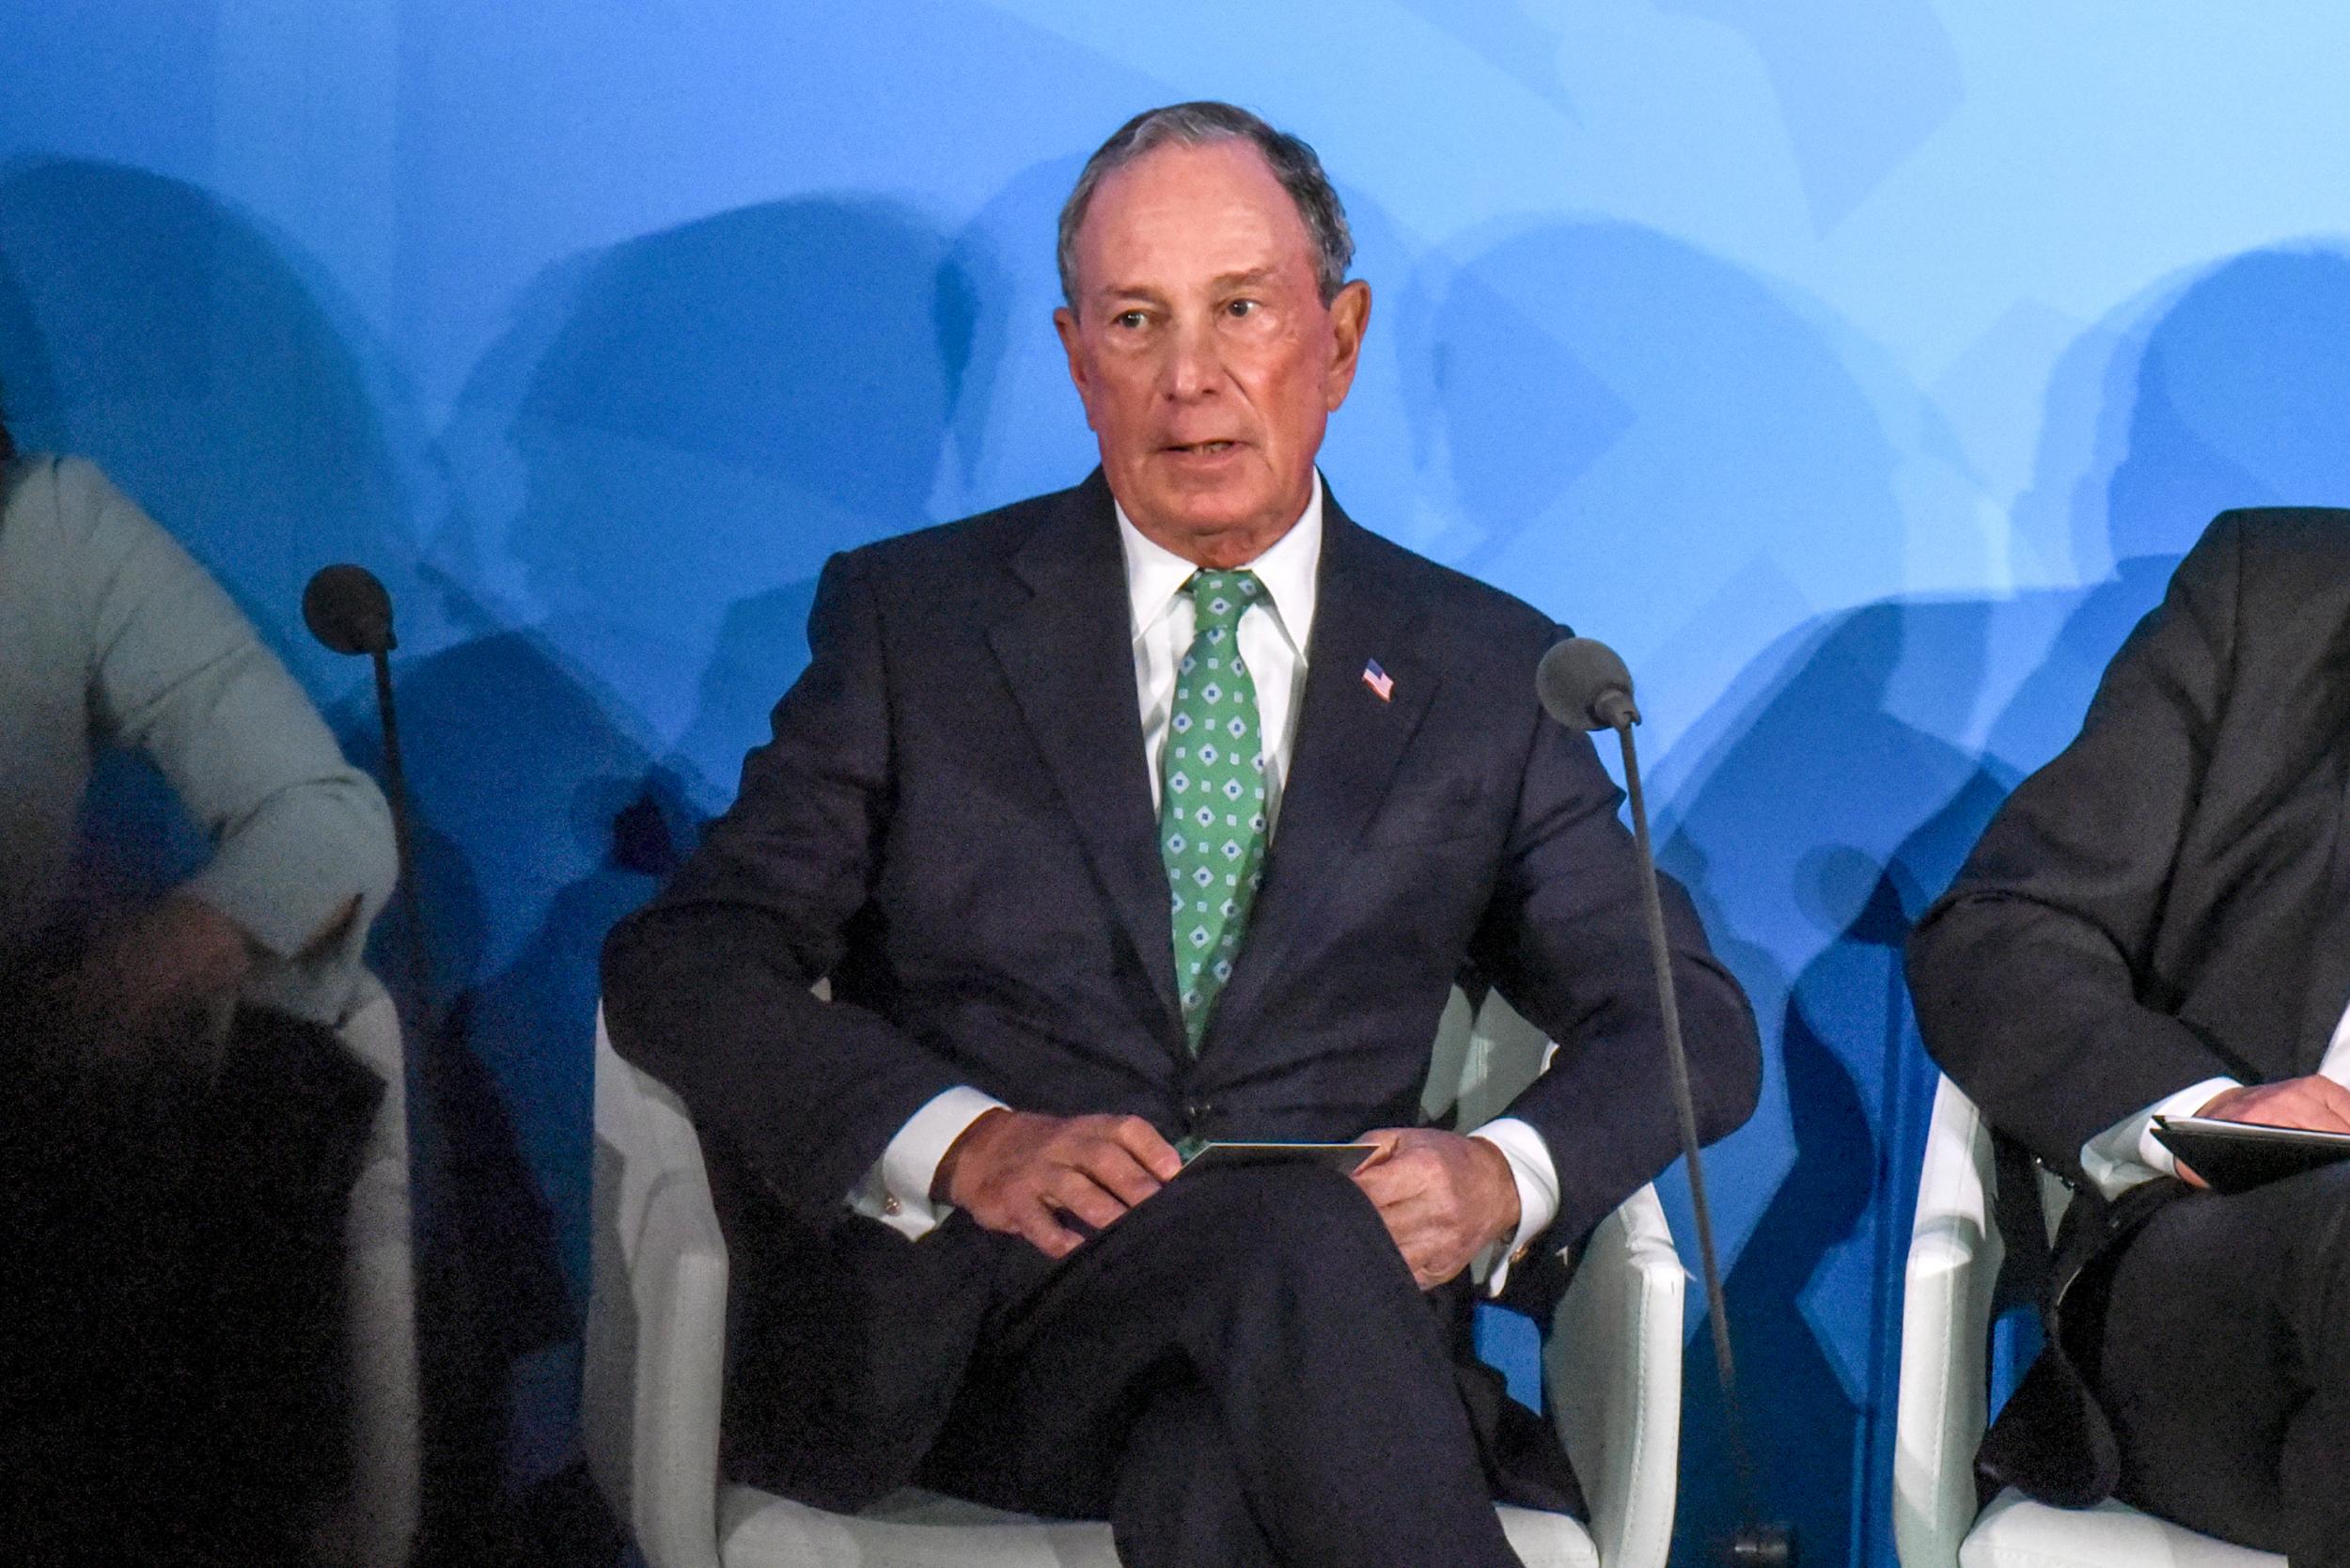 Mike Bloomberg: Billionaire 'to enter Democratic race for president' if Joe Biden drops out